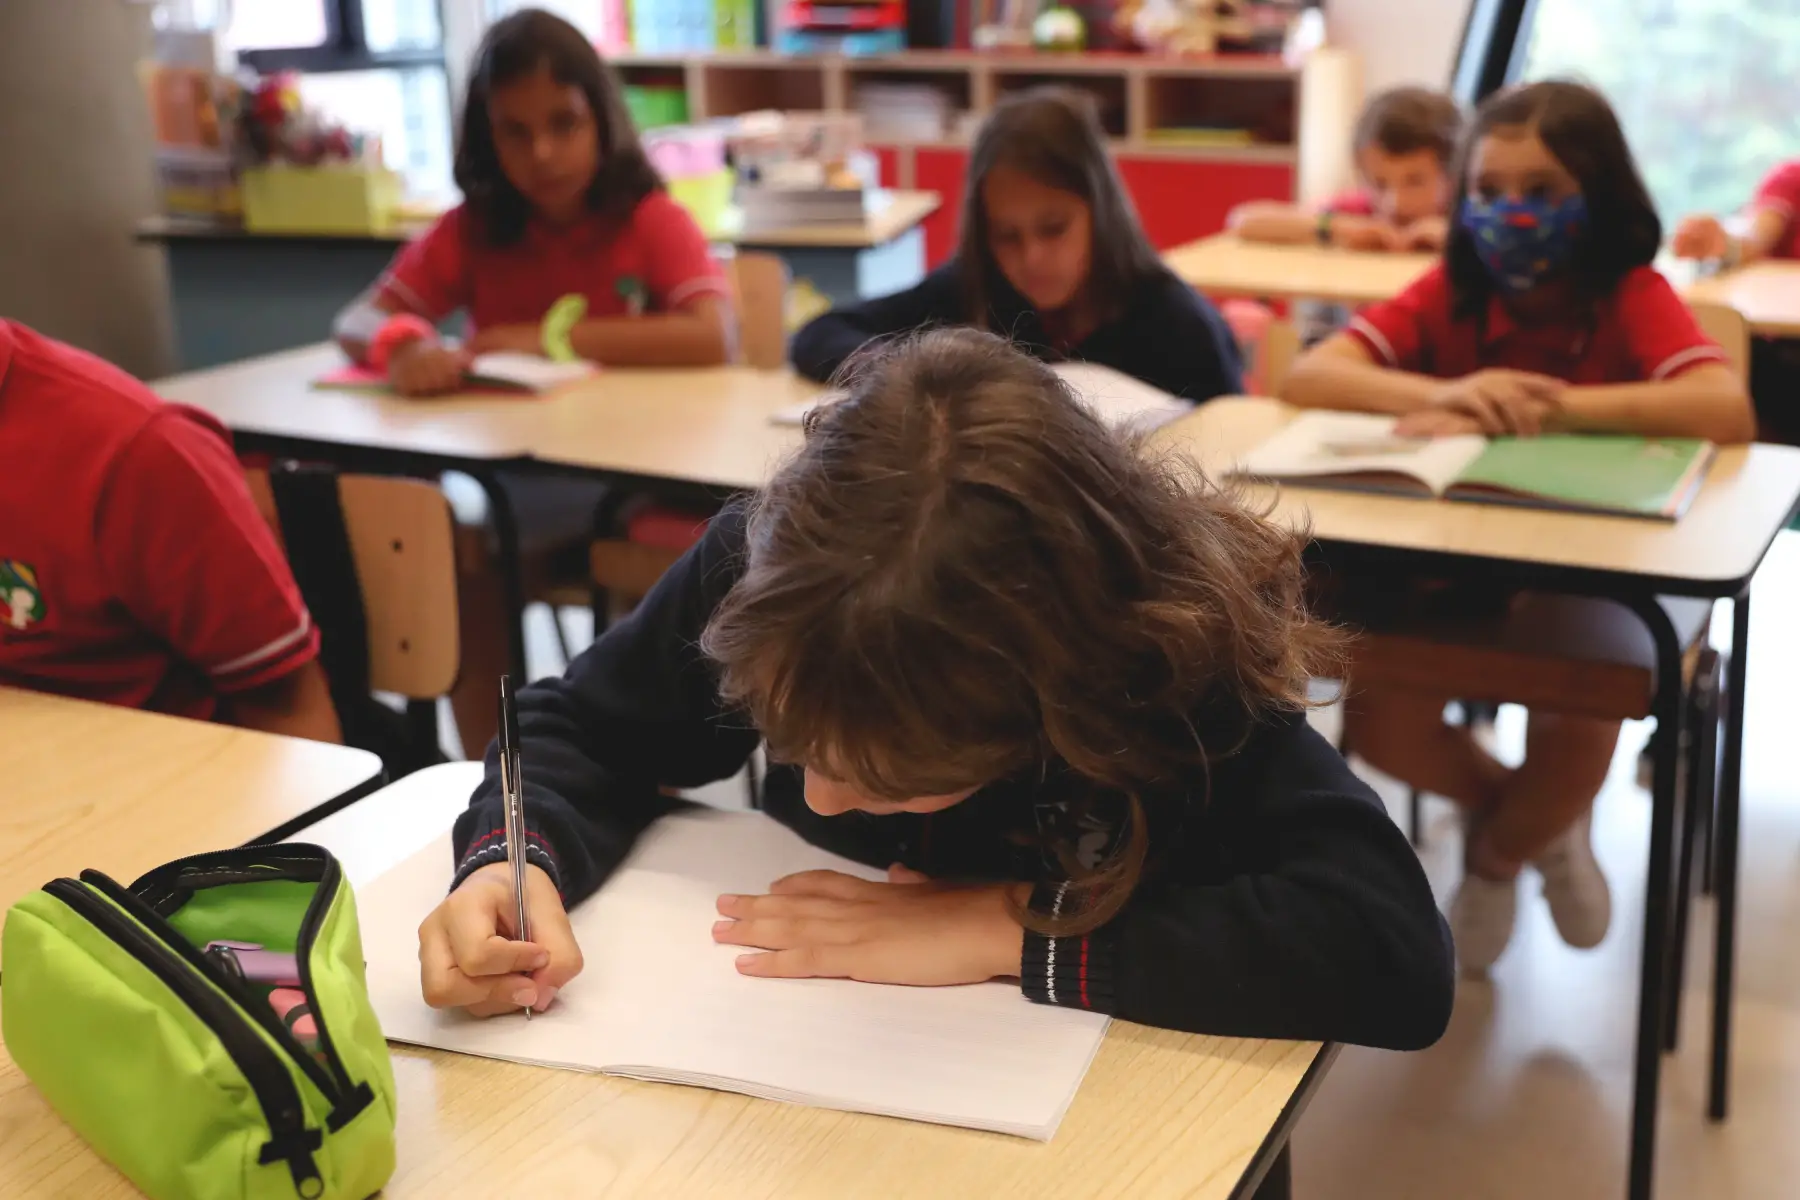 Children in a classroom in Portugal, writing at desks